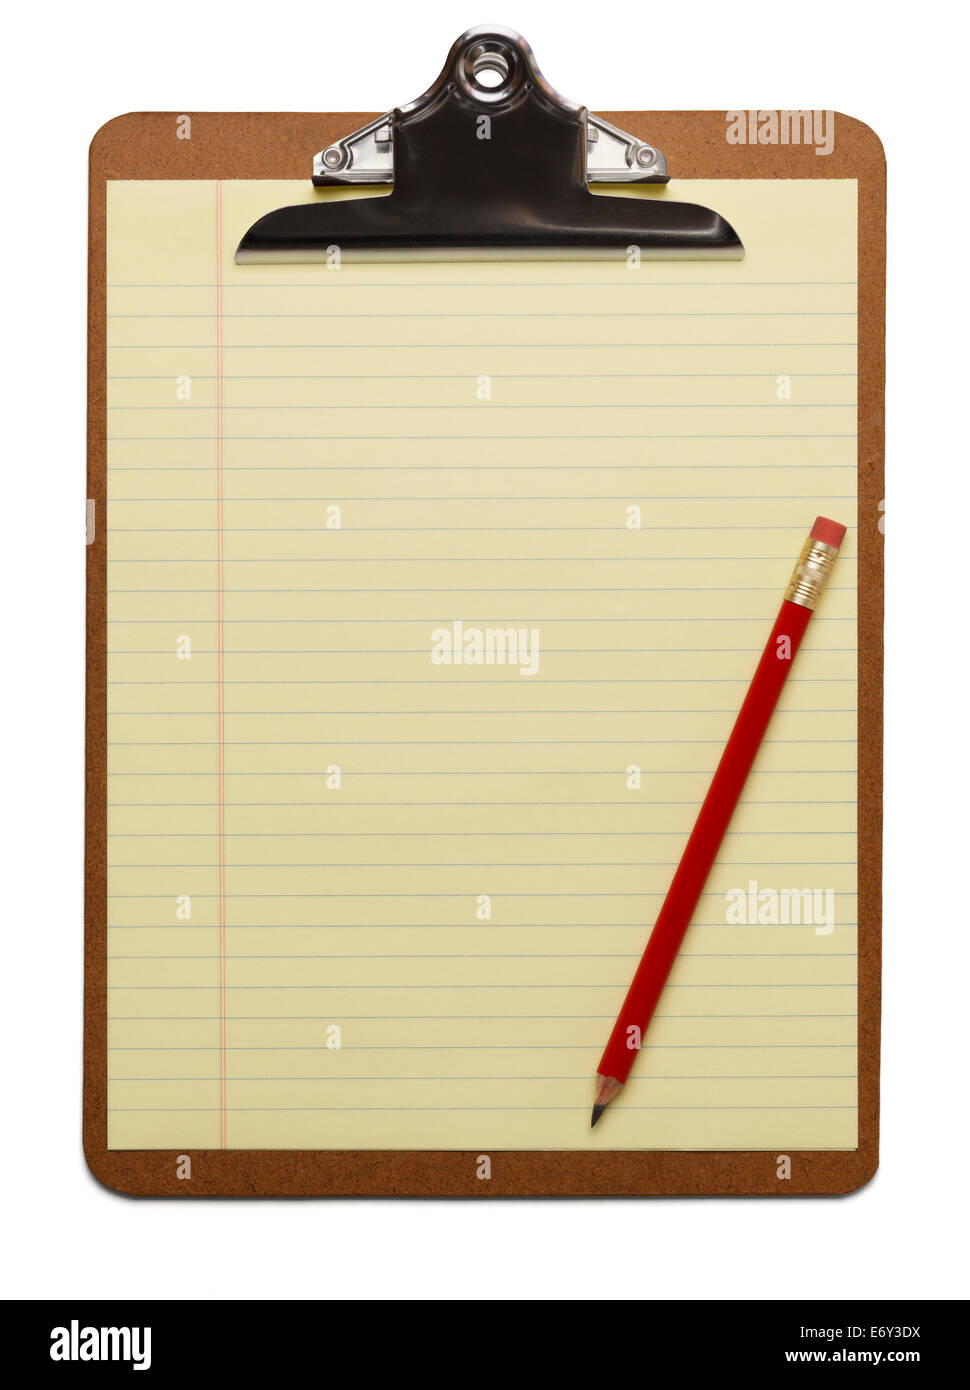 Clipboard with blank line paper and red pencil on isolated background. Stock Photo